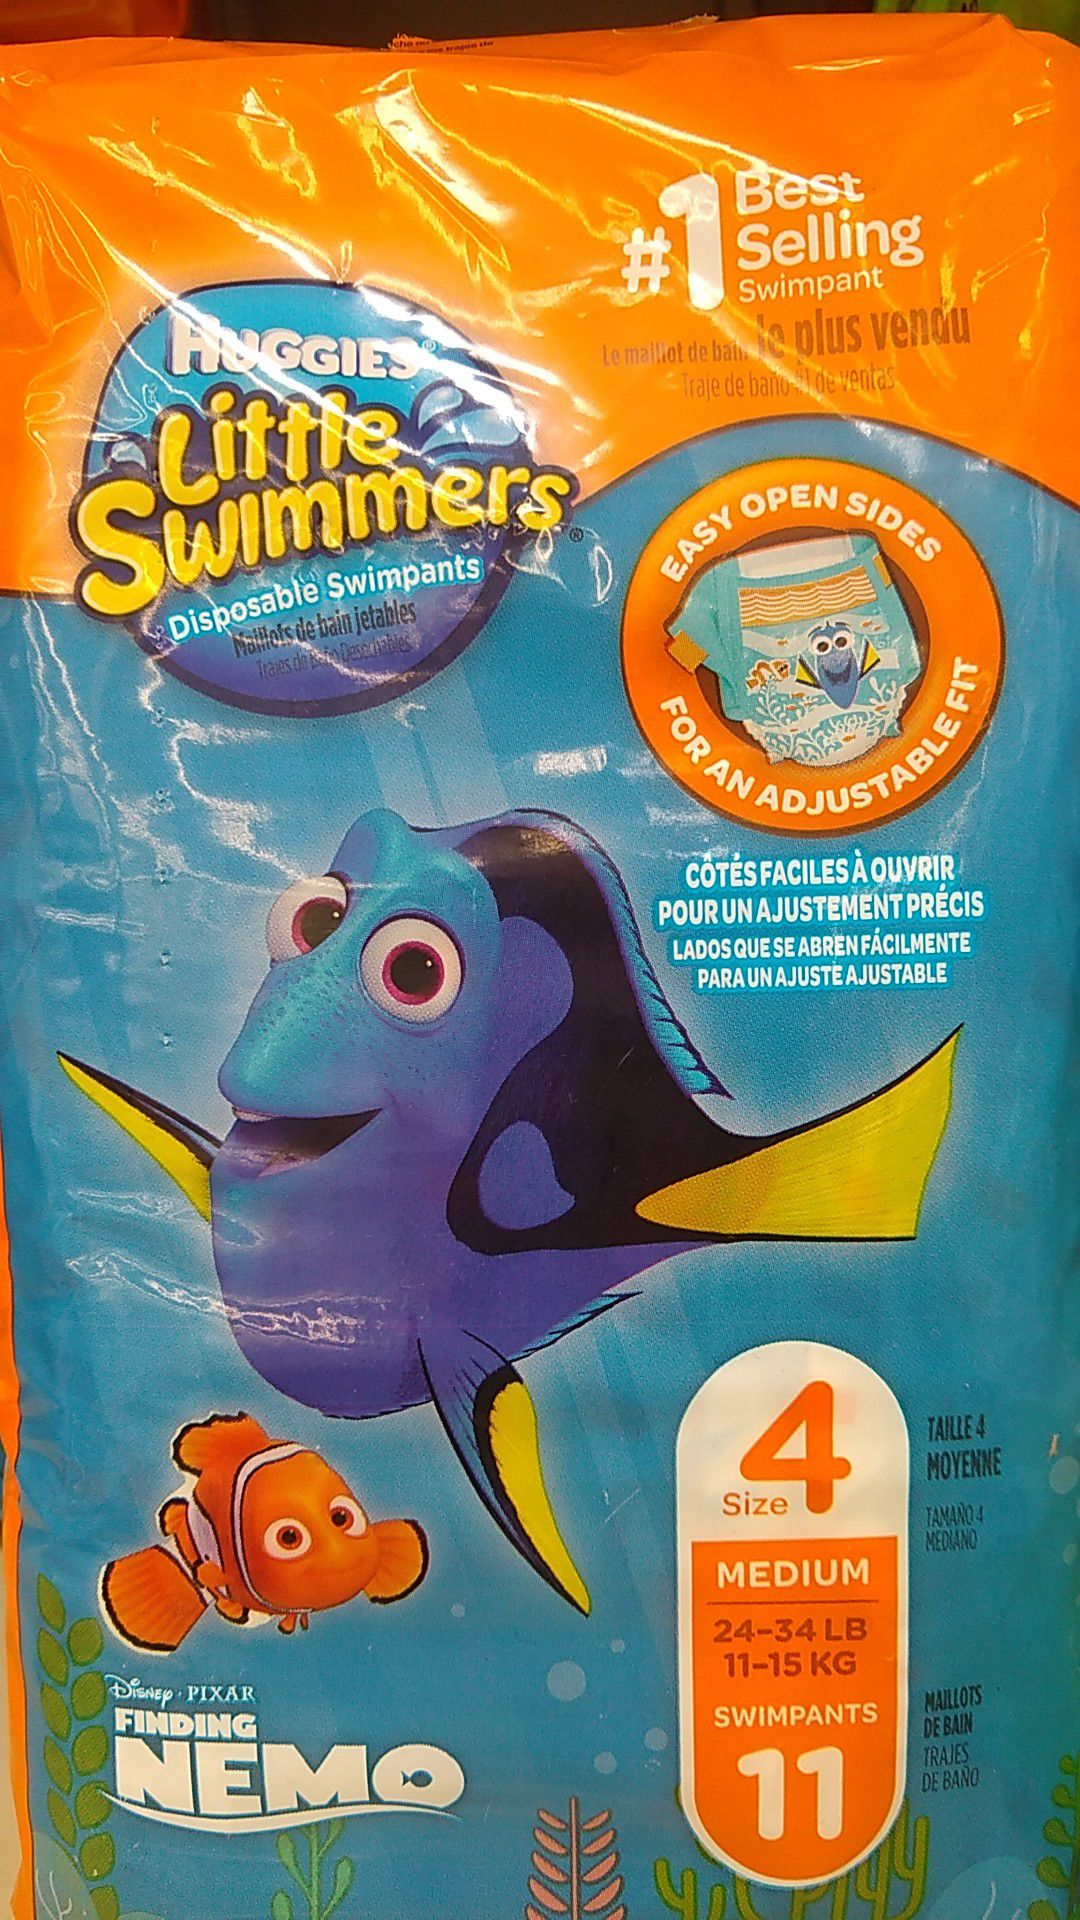 Huggies little swimmers - new in package